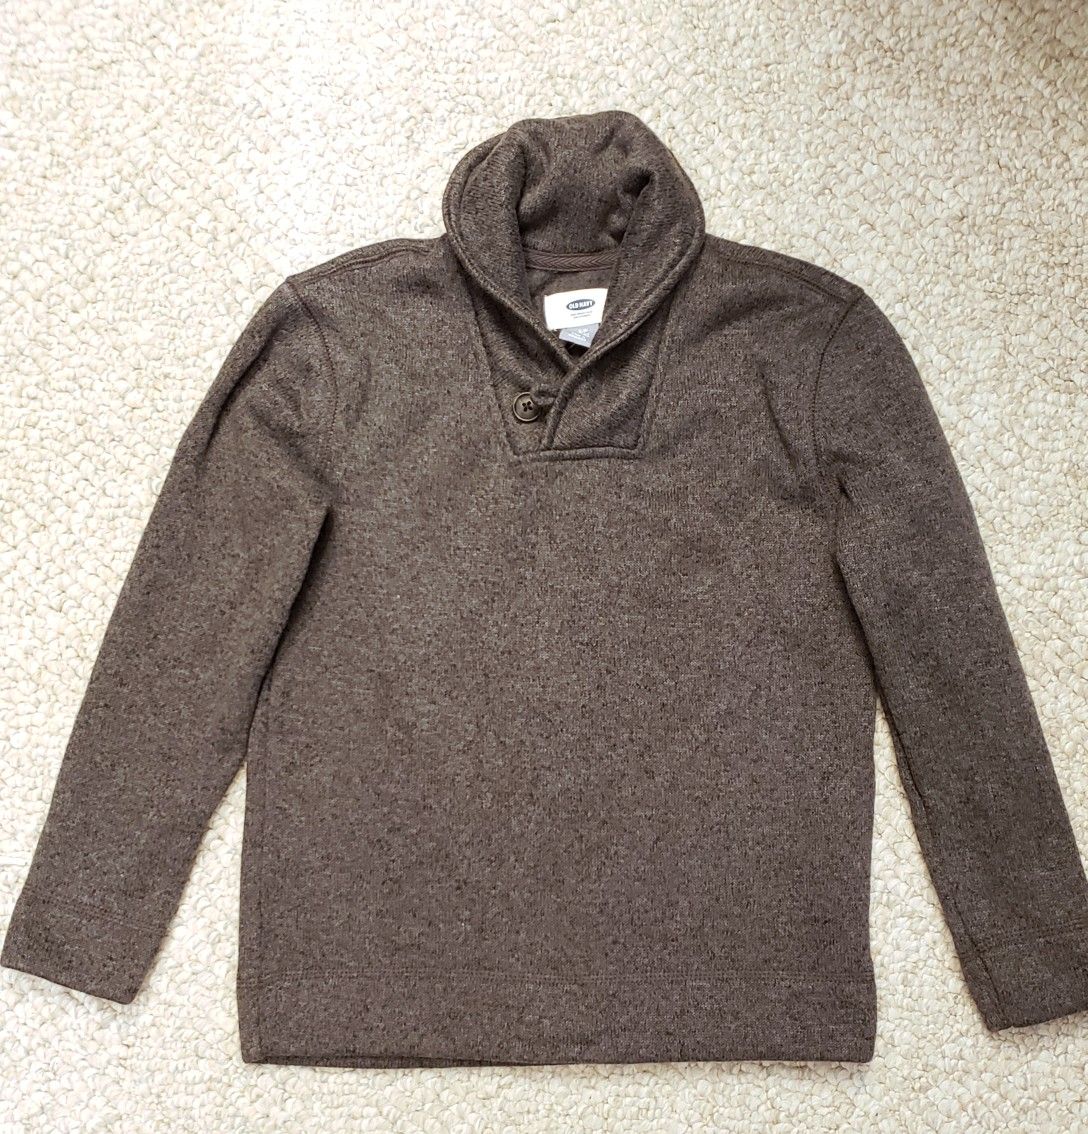 NWT! Old Navy Sweater - Boy Size S